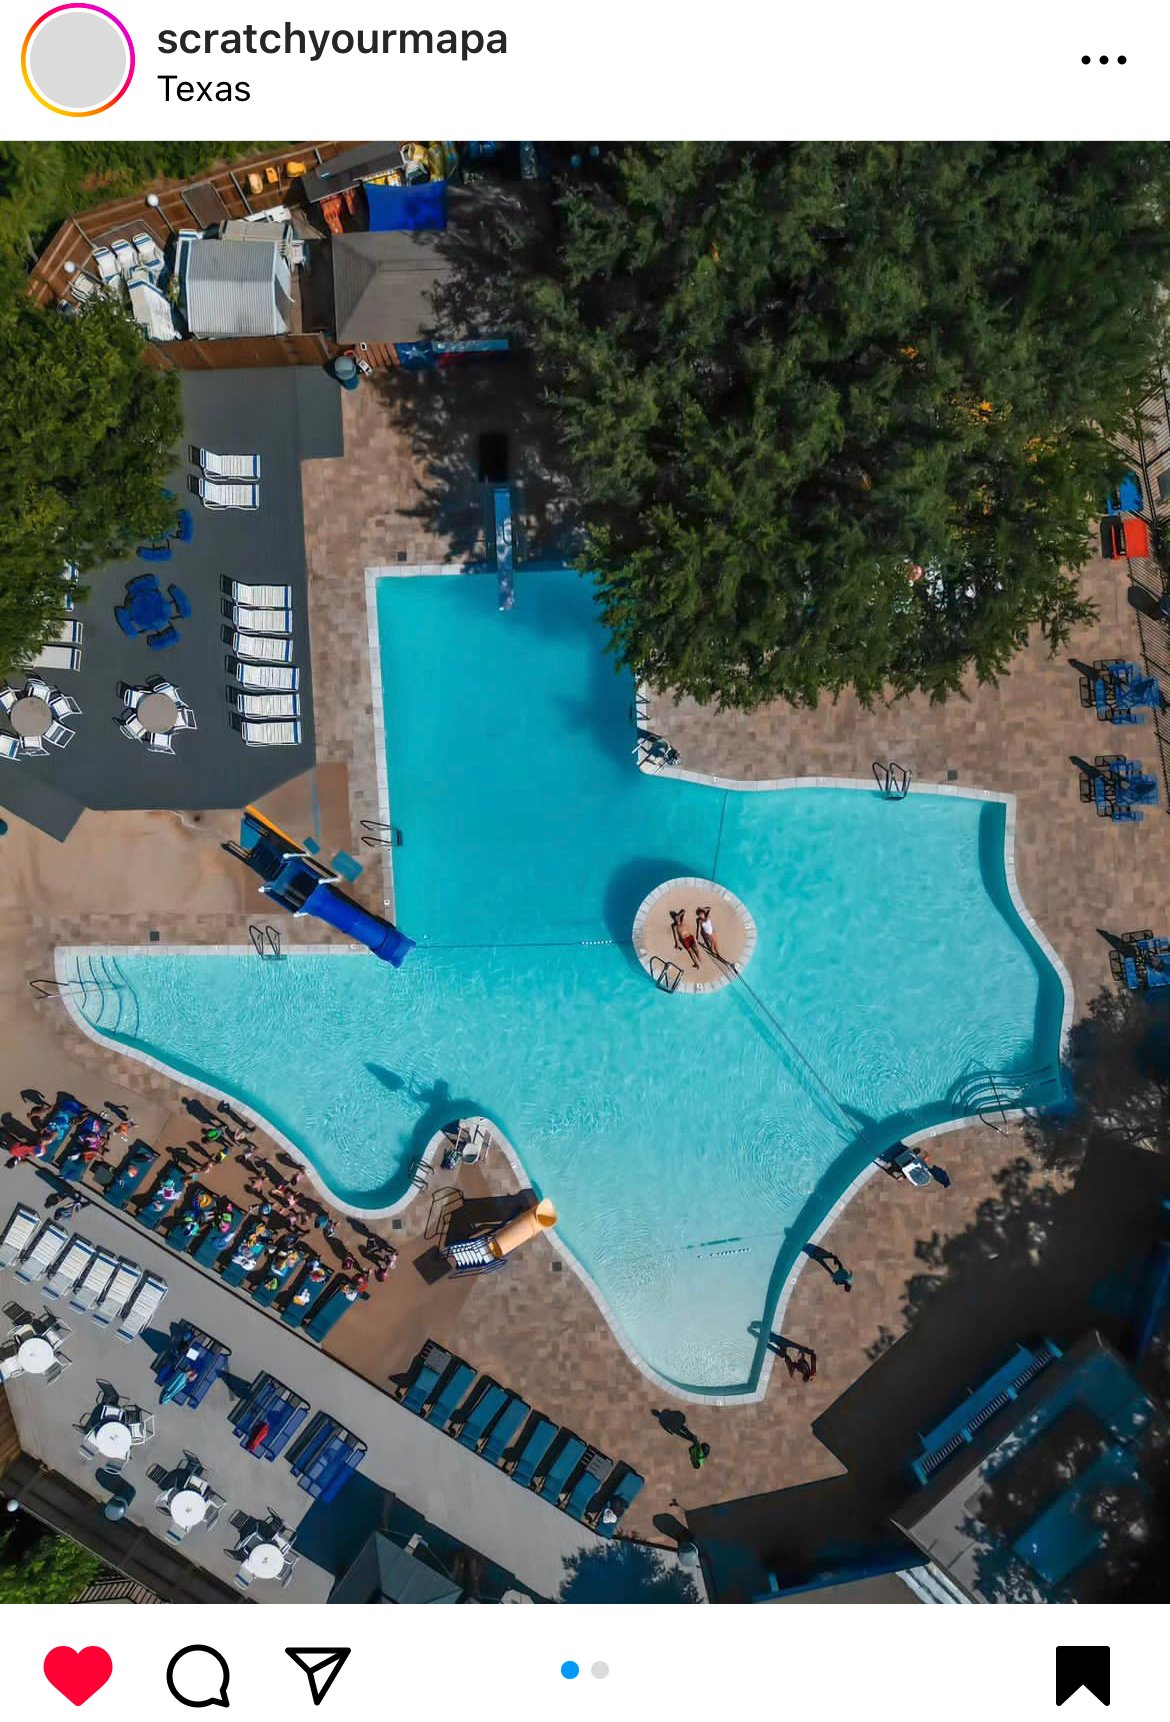 The Texas Pool, cool places in Texas to visit